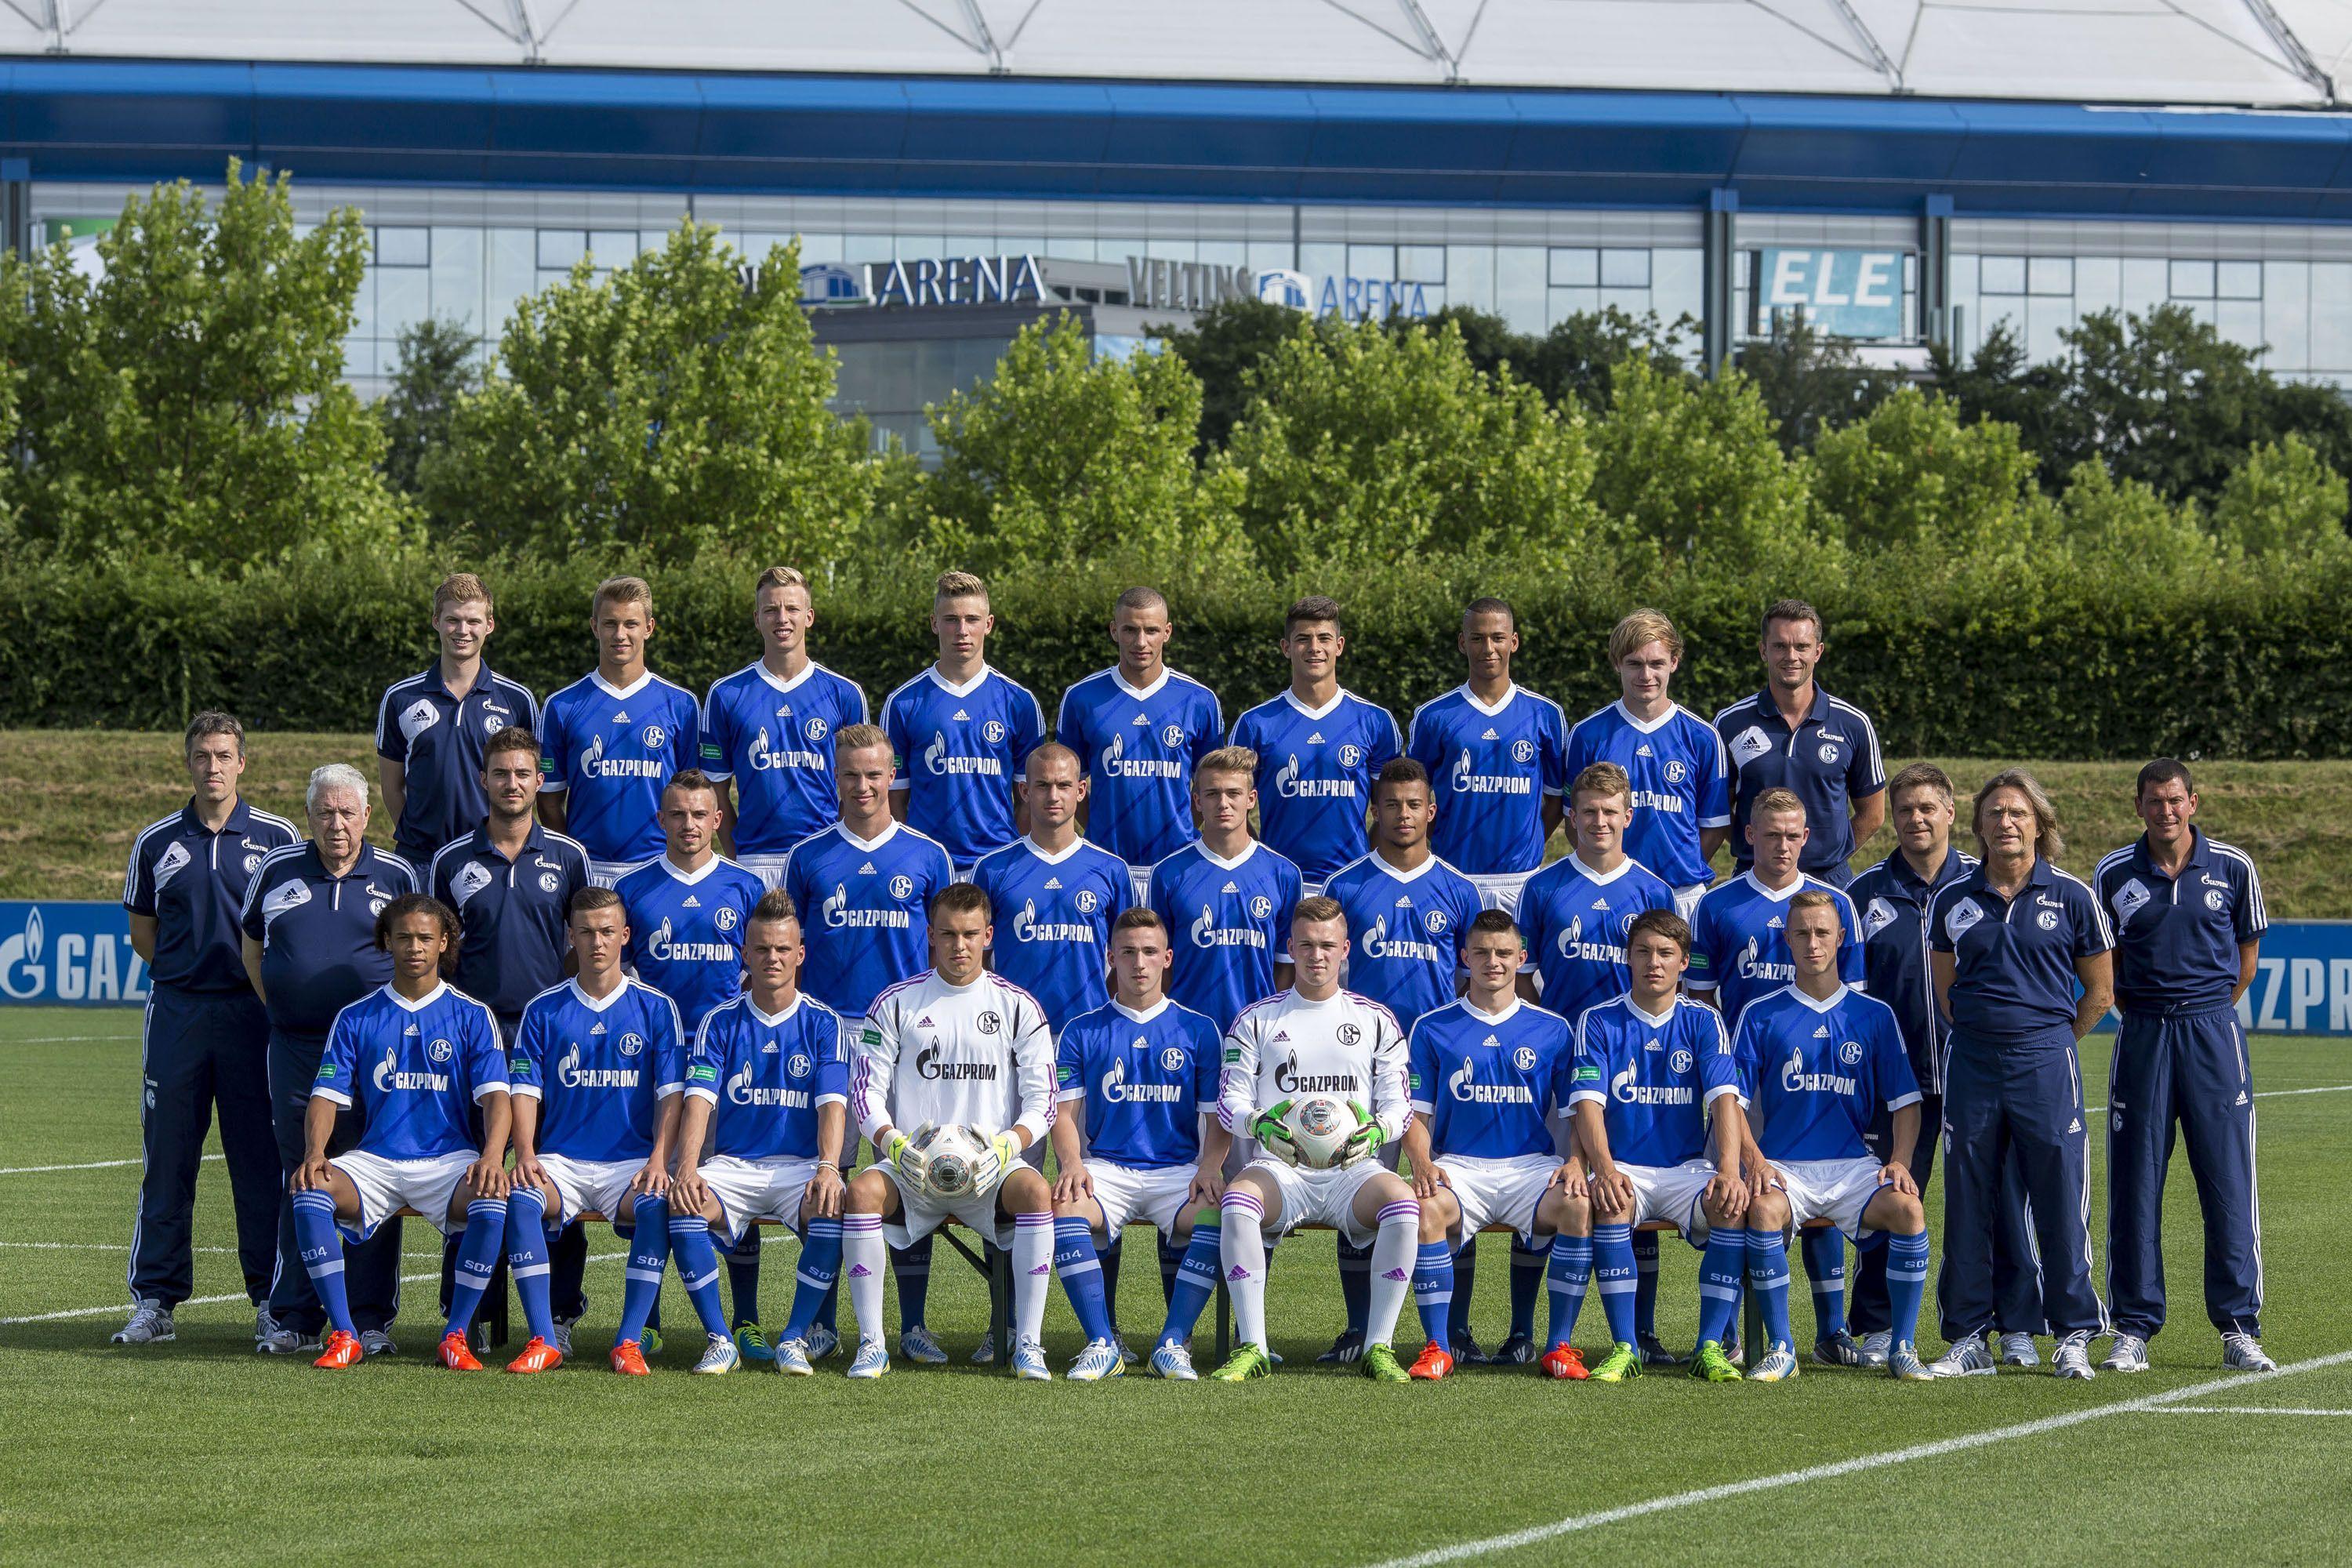 Schalke 04 2013 wallpaper and image, picture, photo